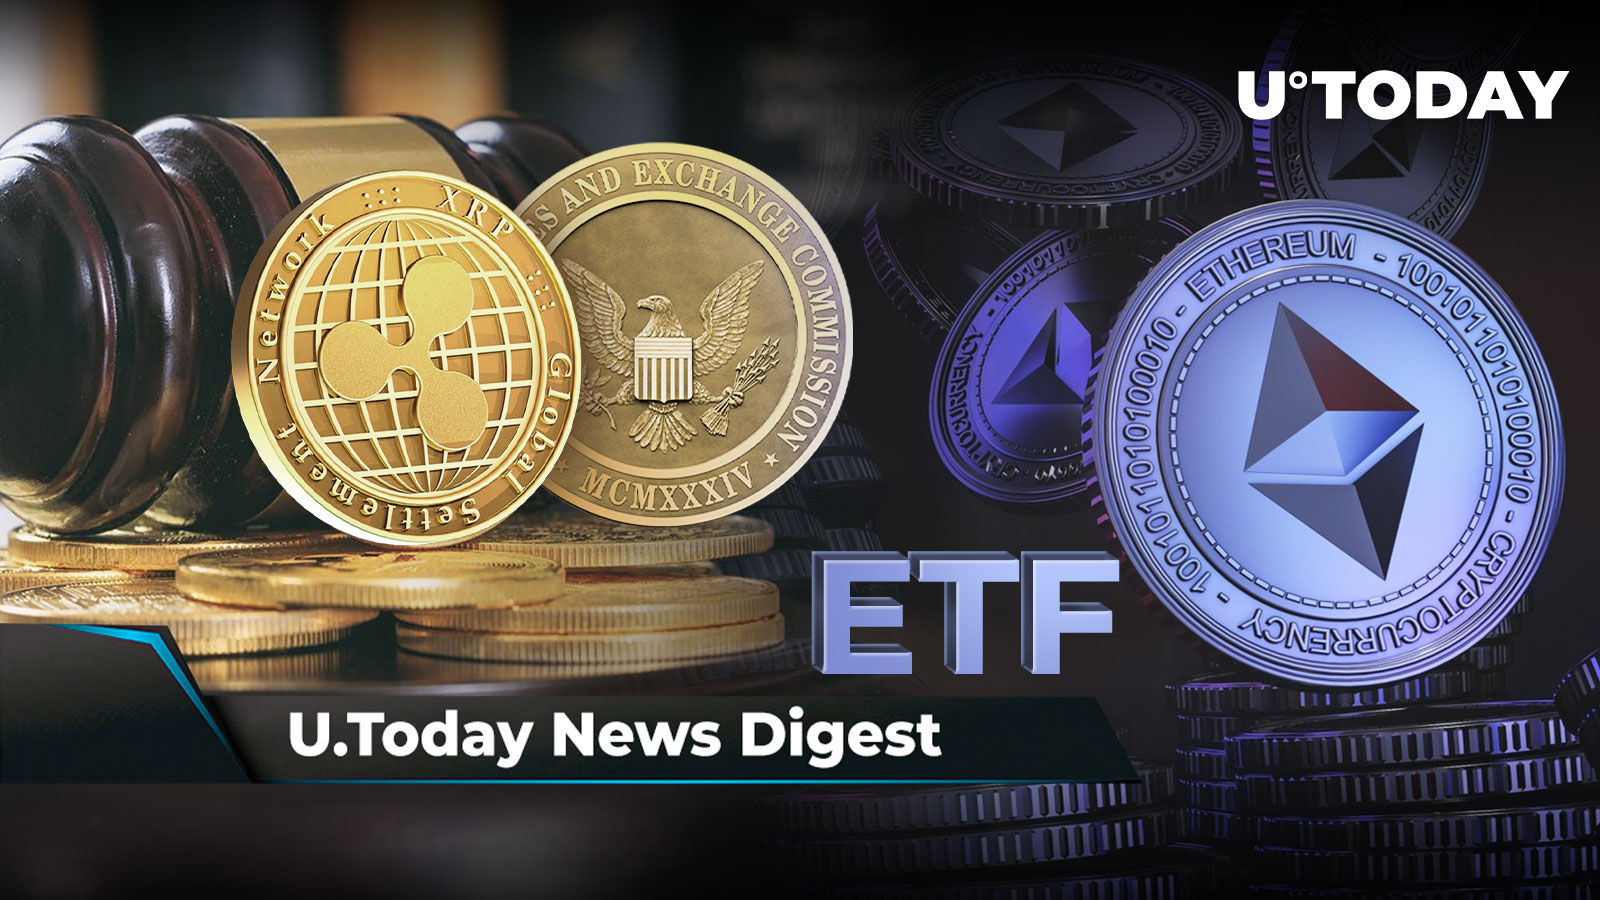 Here’s Next Key Deadline in Ripple v. SEC Case, Bloomberg Expert Doubts Ethereum ETF Launch in March, Tron Founder Makes Mystery 0 Million Transfer: Crypto News Digest by U.Today